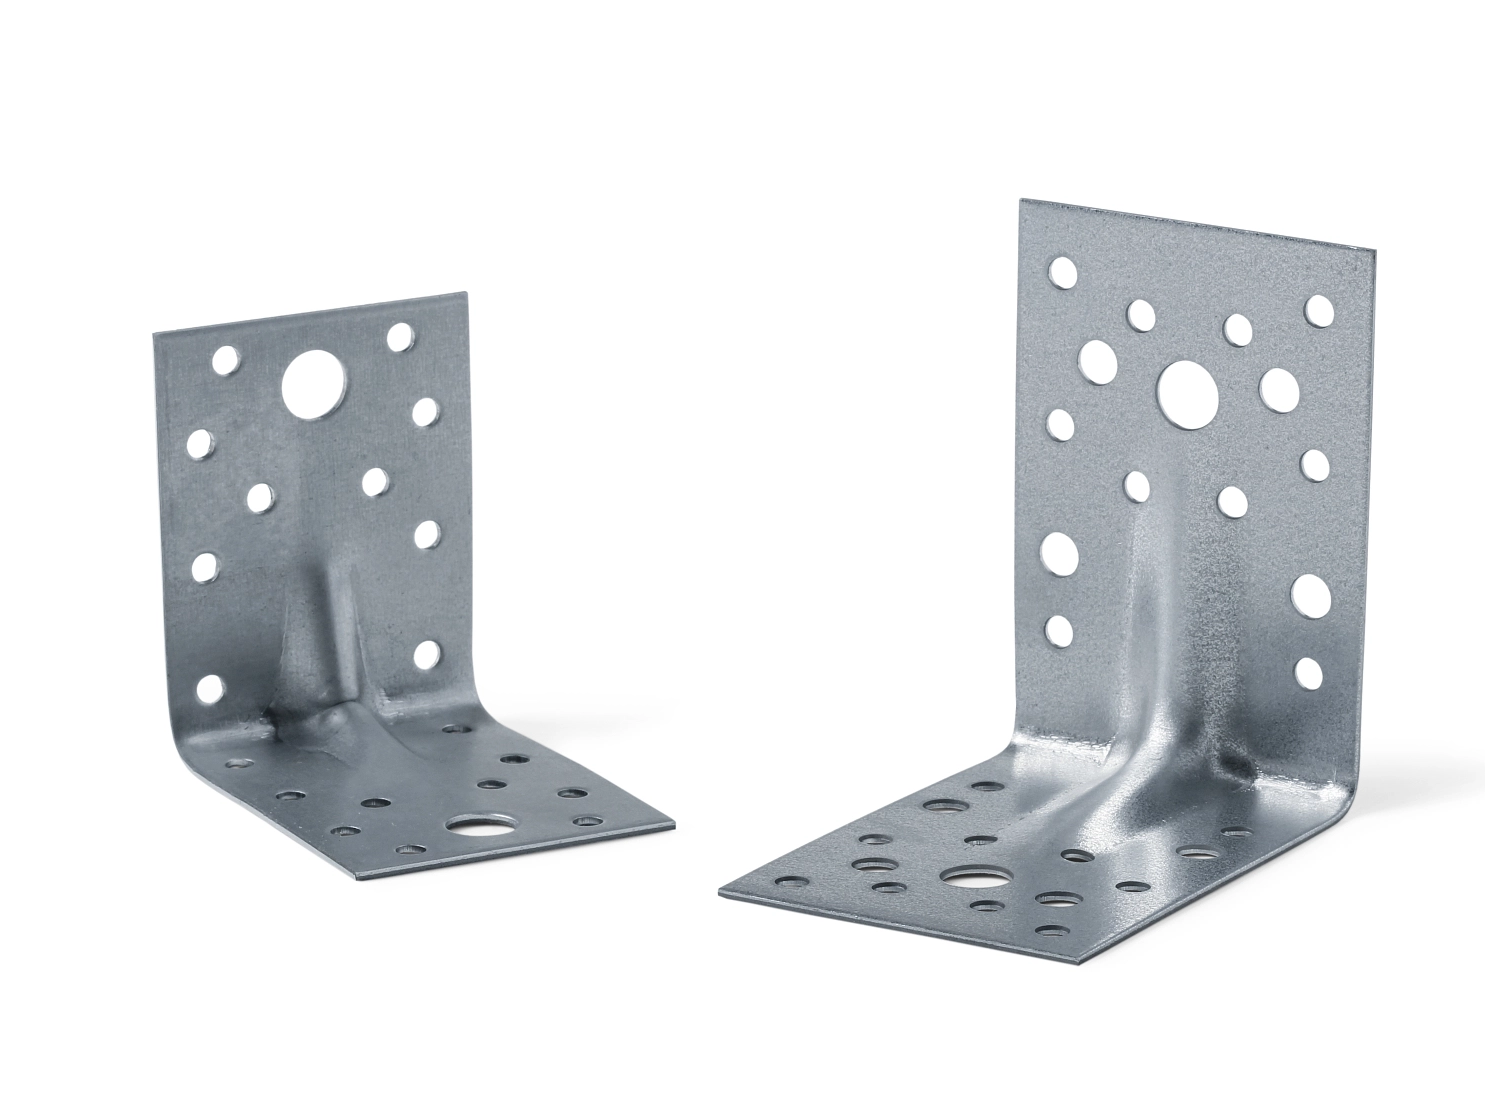 5 Strategies To Enhance The Durability of Your Sheet Metal Parts